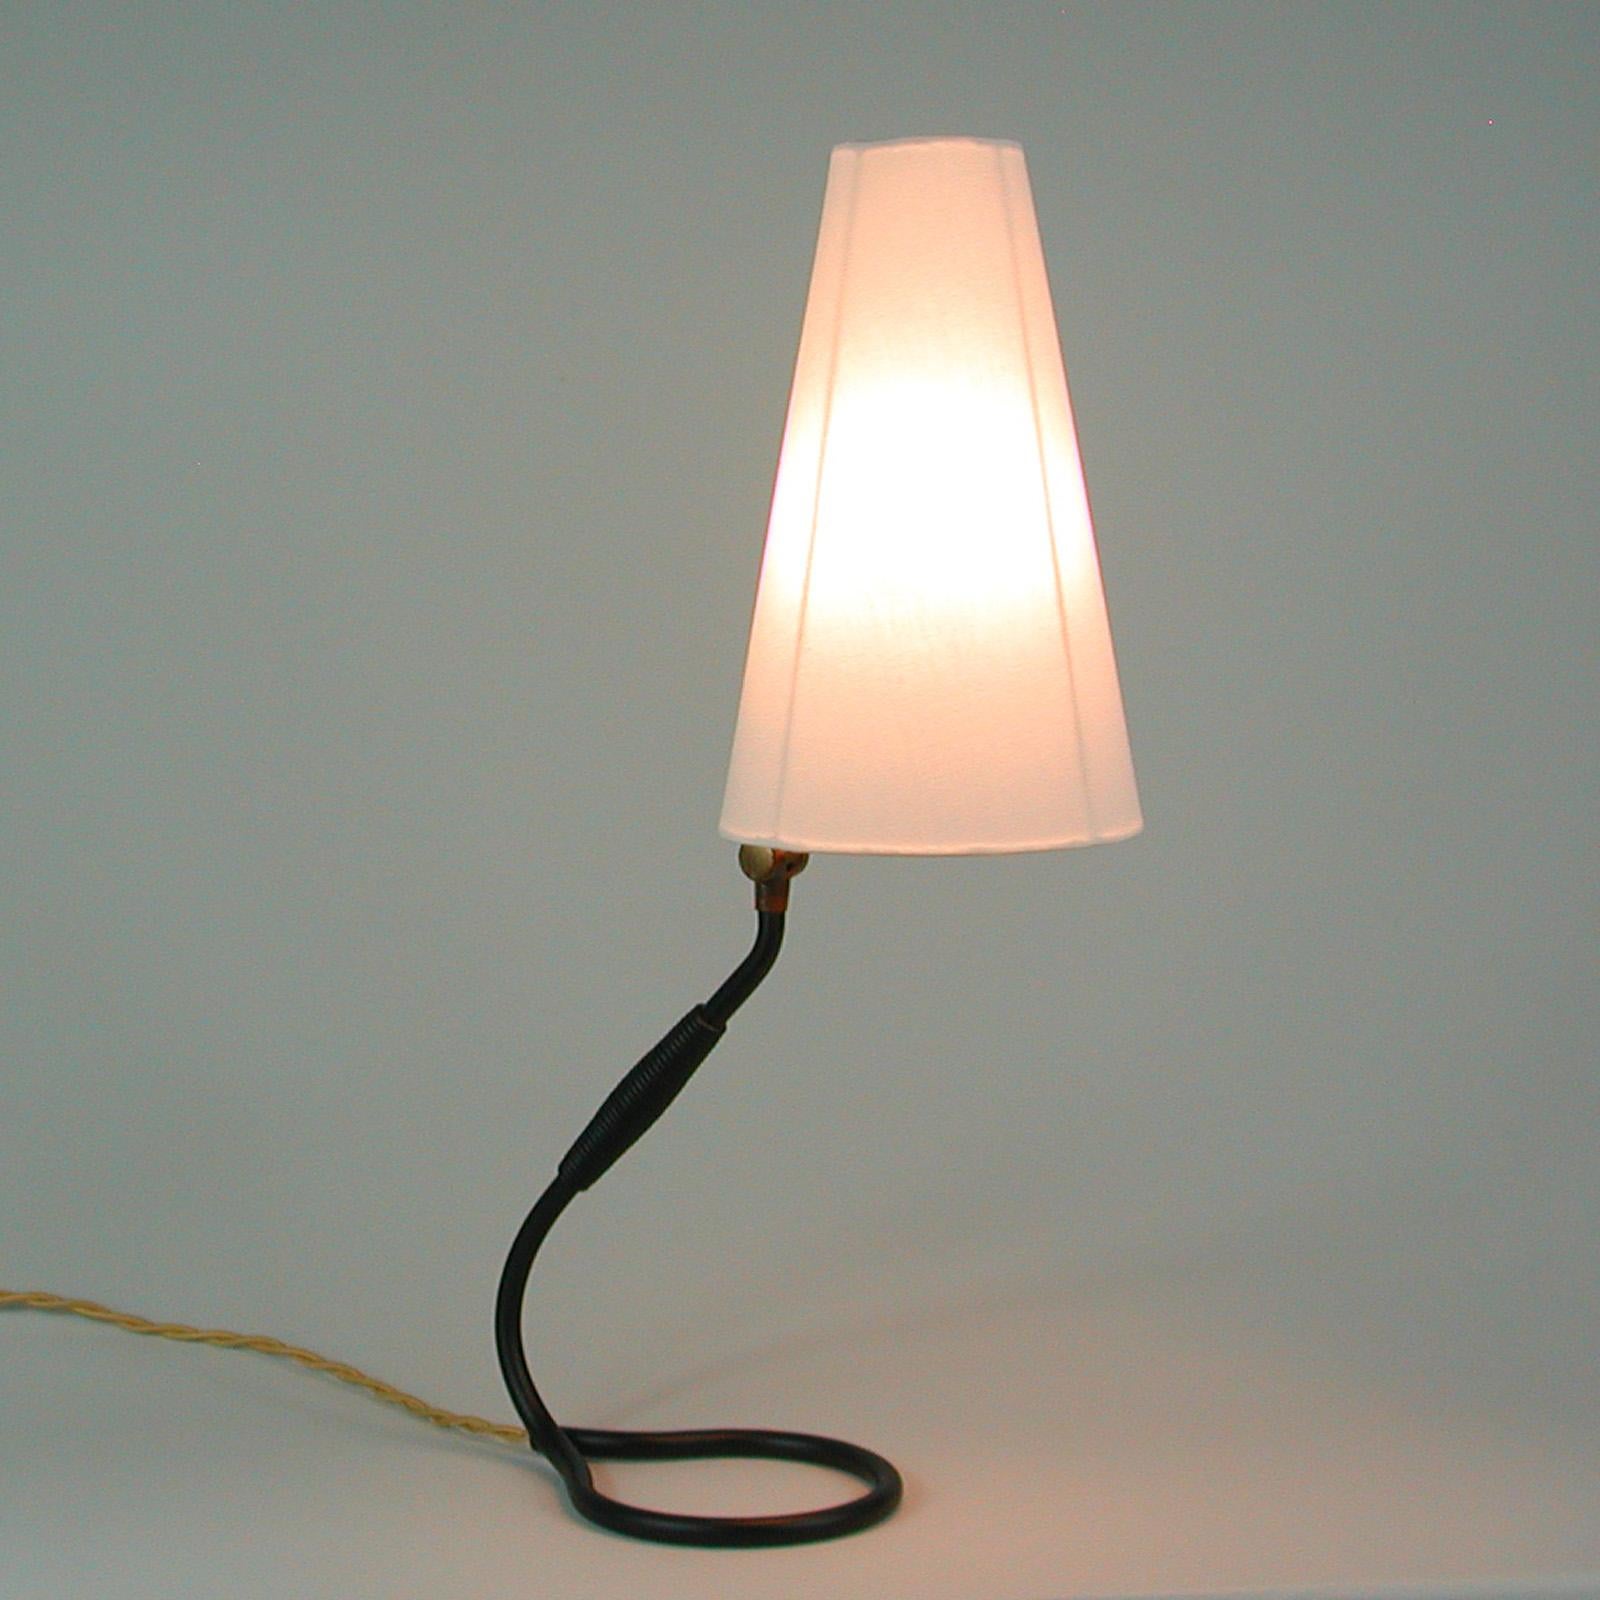 Adjustable Black Brass and Bakelite Wall or Table Lamp 306 by Kaare Klint, 1950s For Sale 8